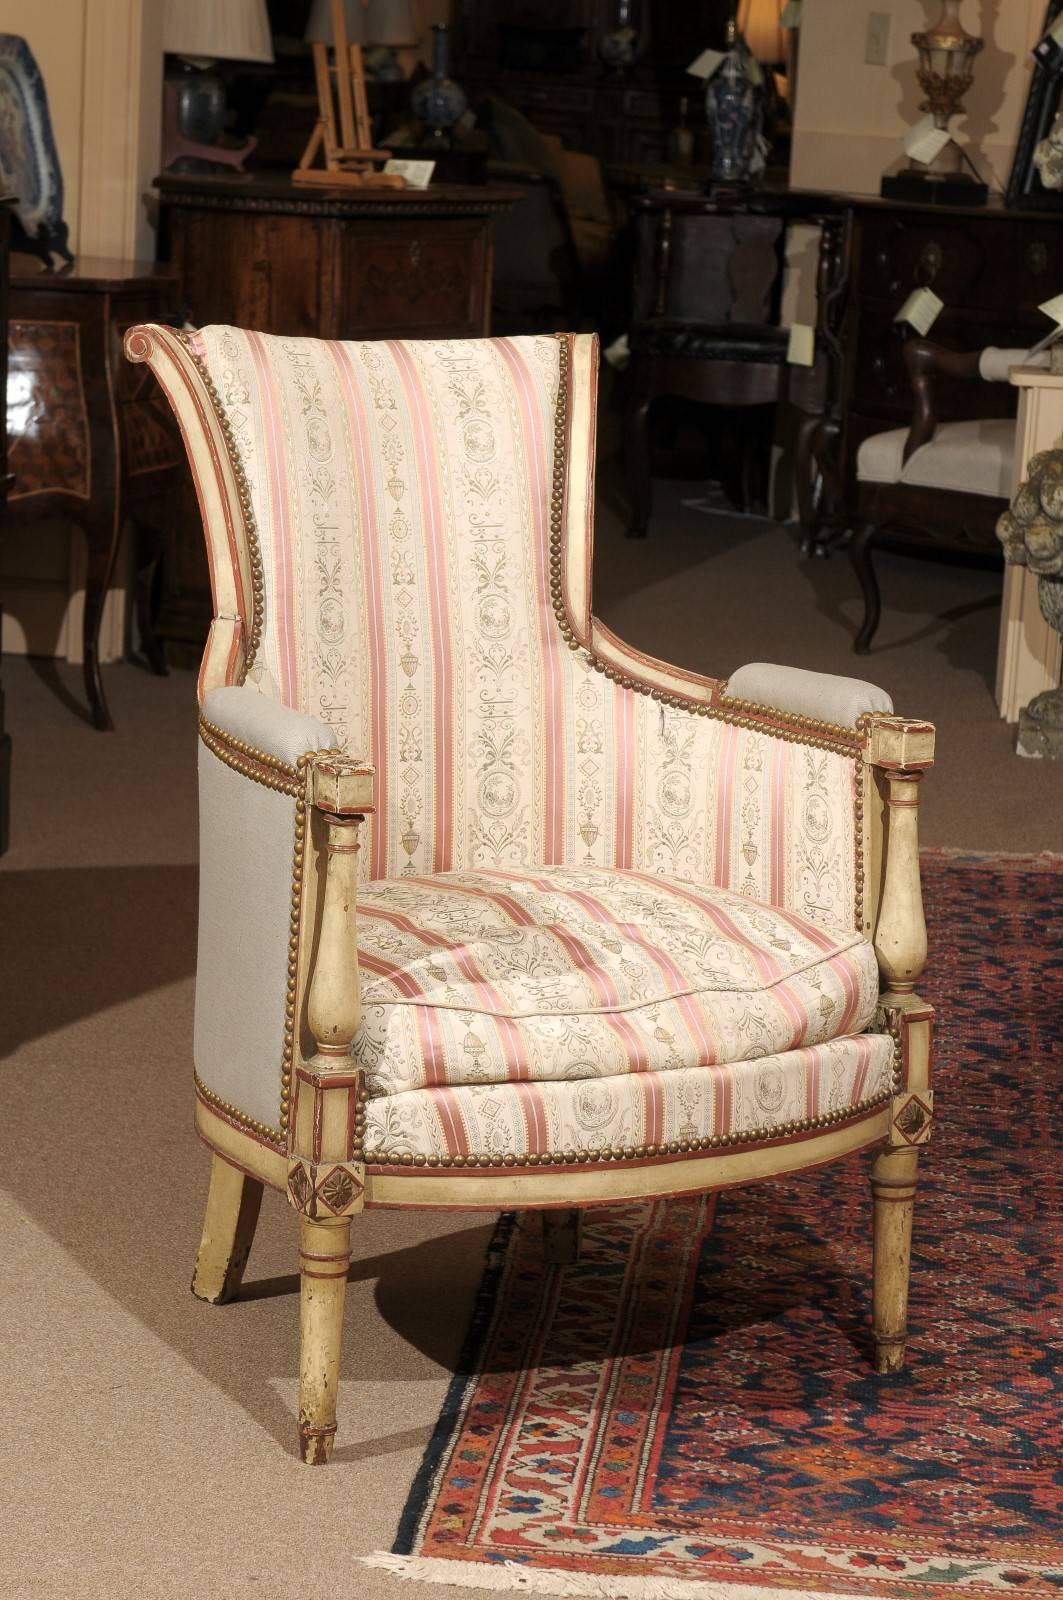 19th century French Directoire bergere chair in cream colored painted finish with rusty red accents.